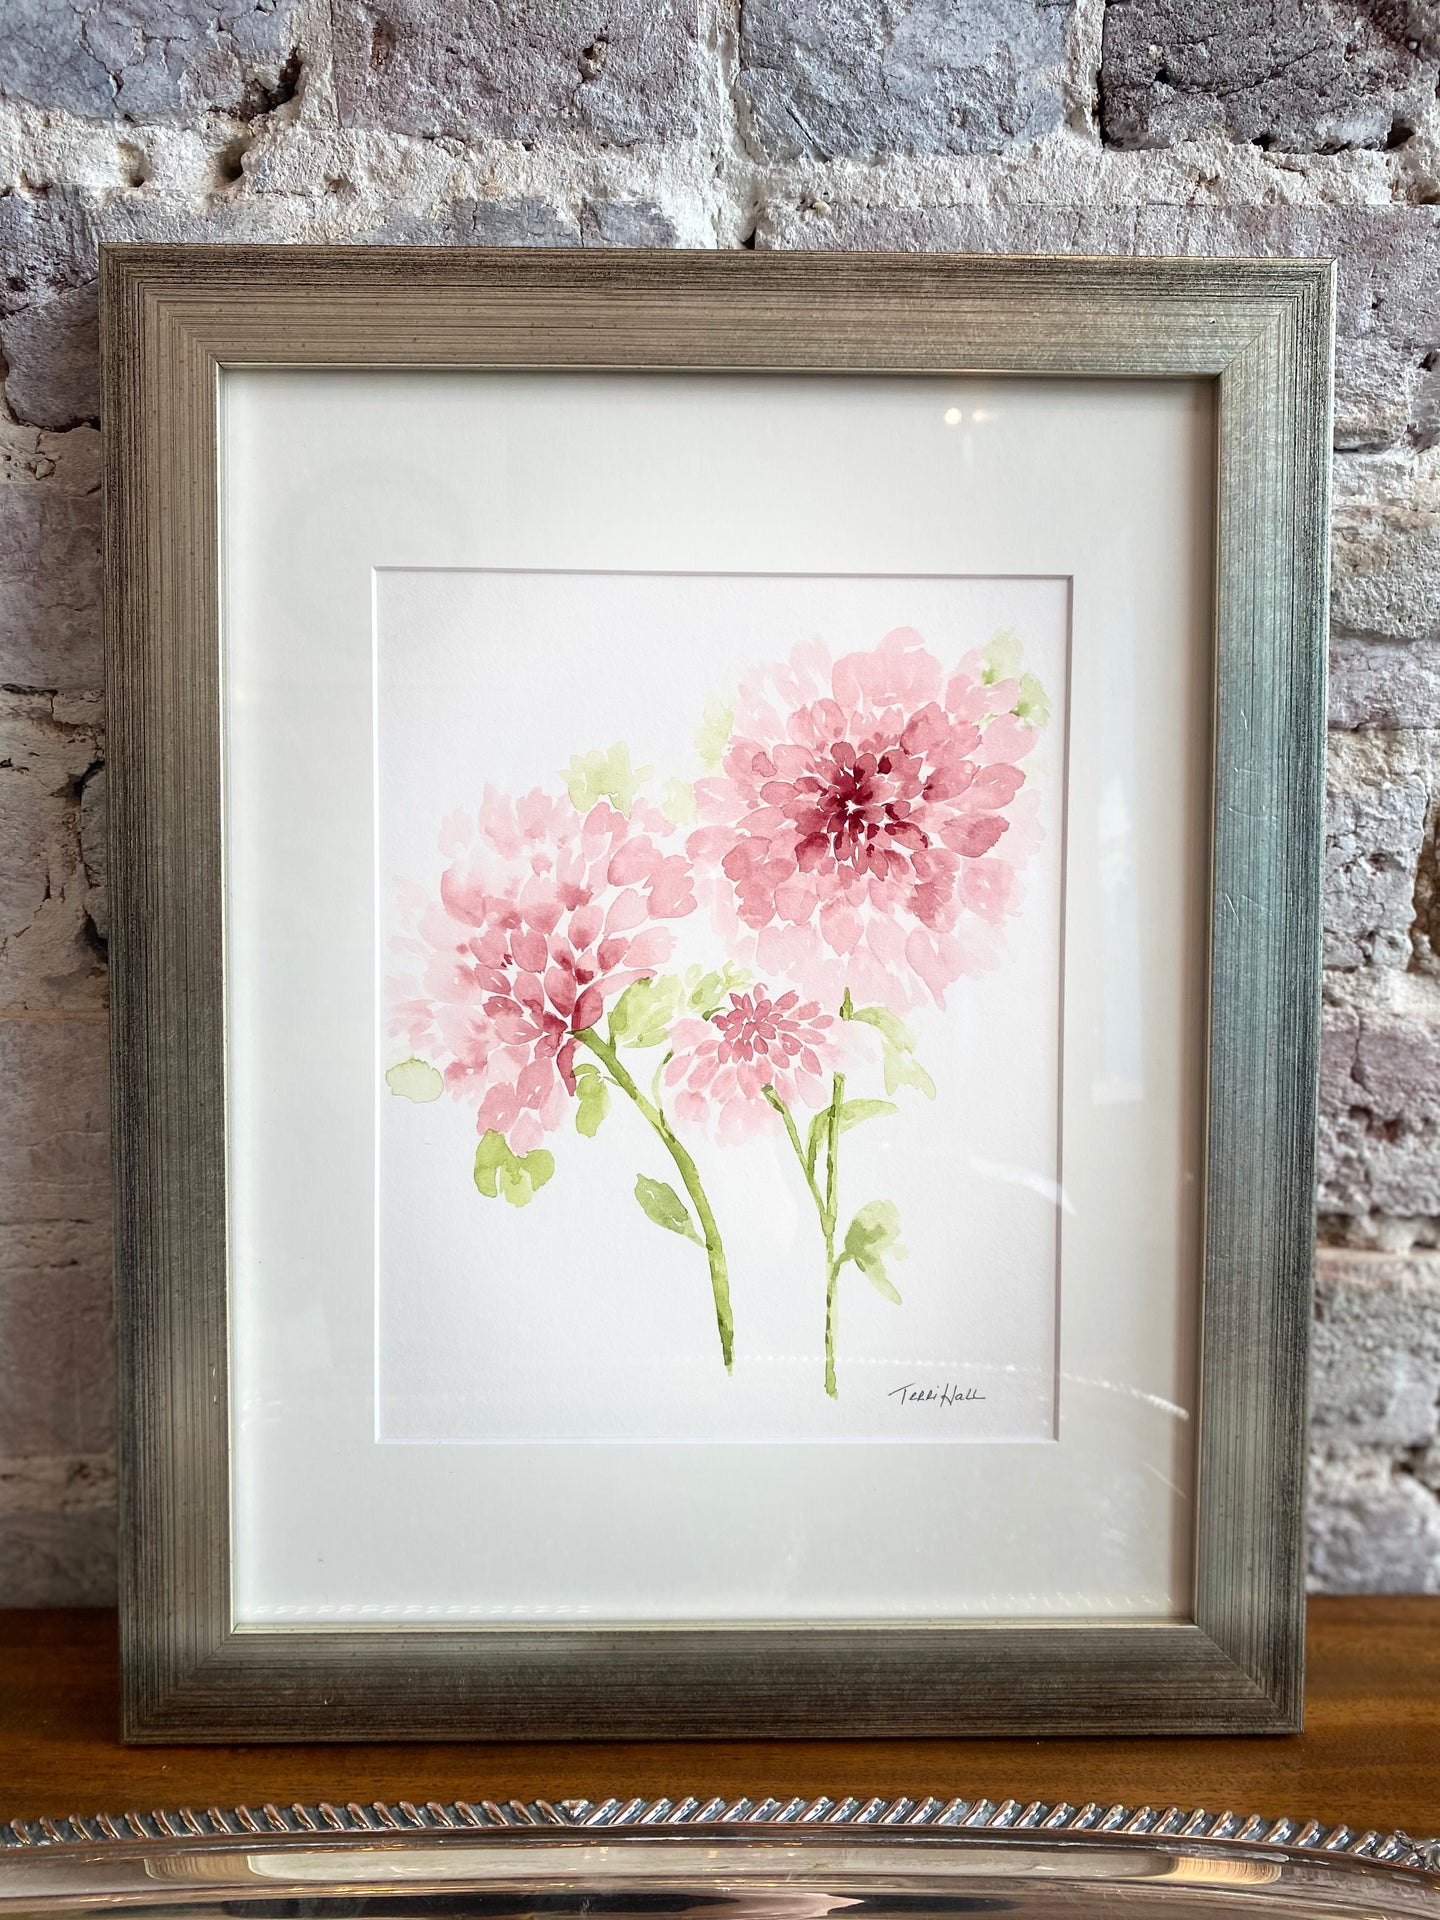 Framed Oringal Local Watercolor by Terri H. Hall - 